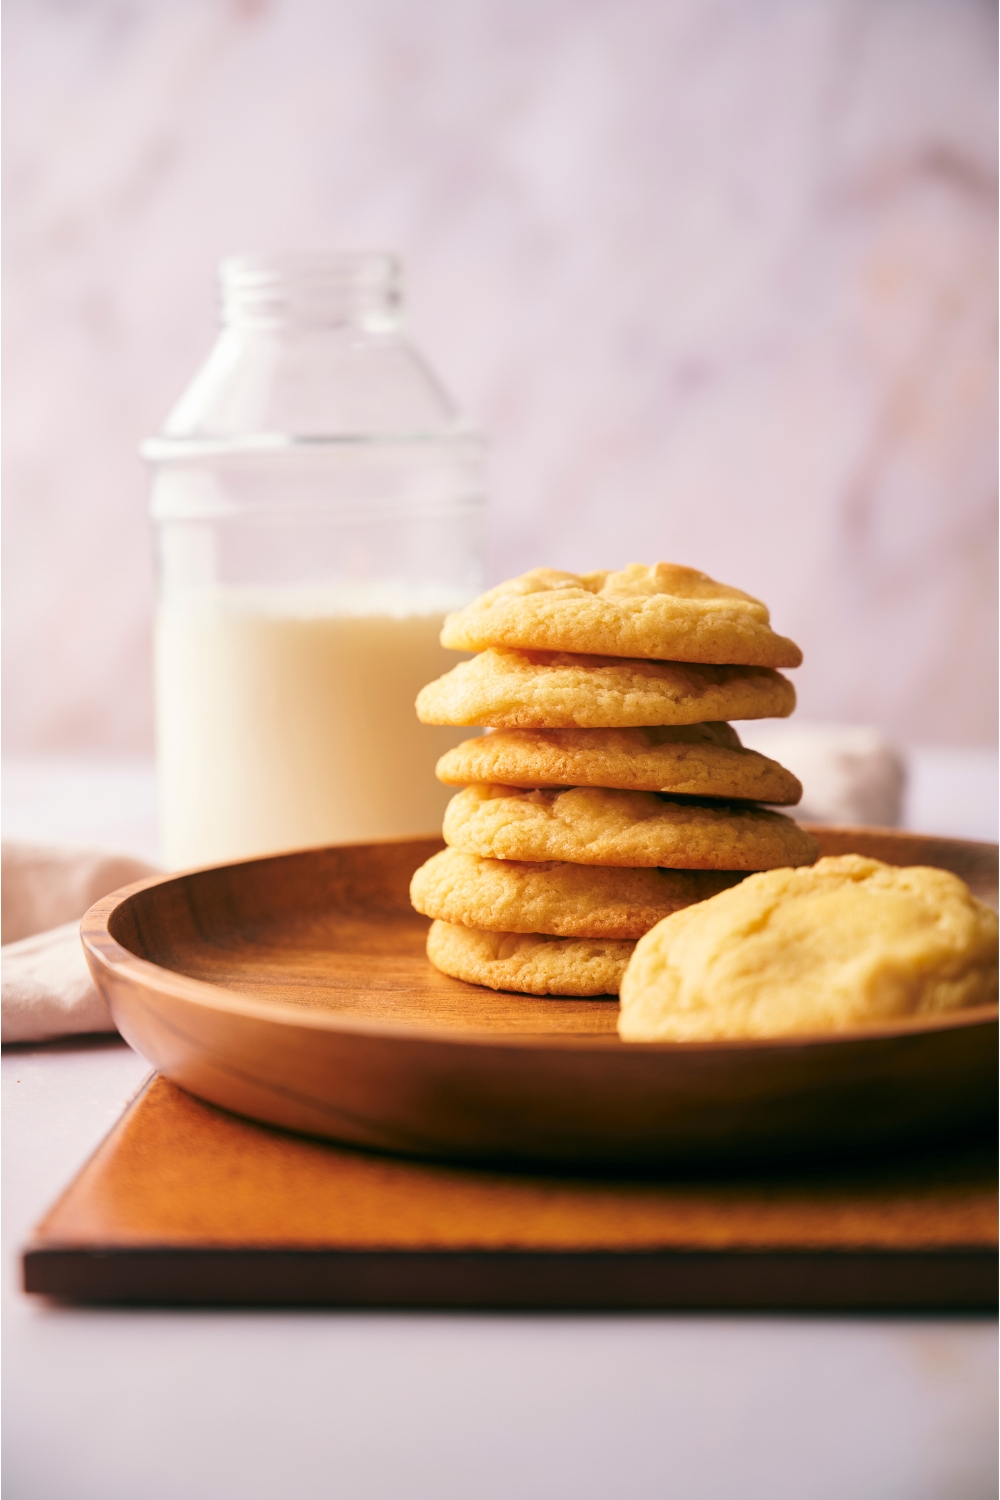 A stack of cookies with one fallen over on a wooden plate with a jar of milk in the background.